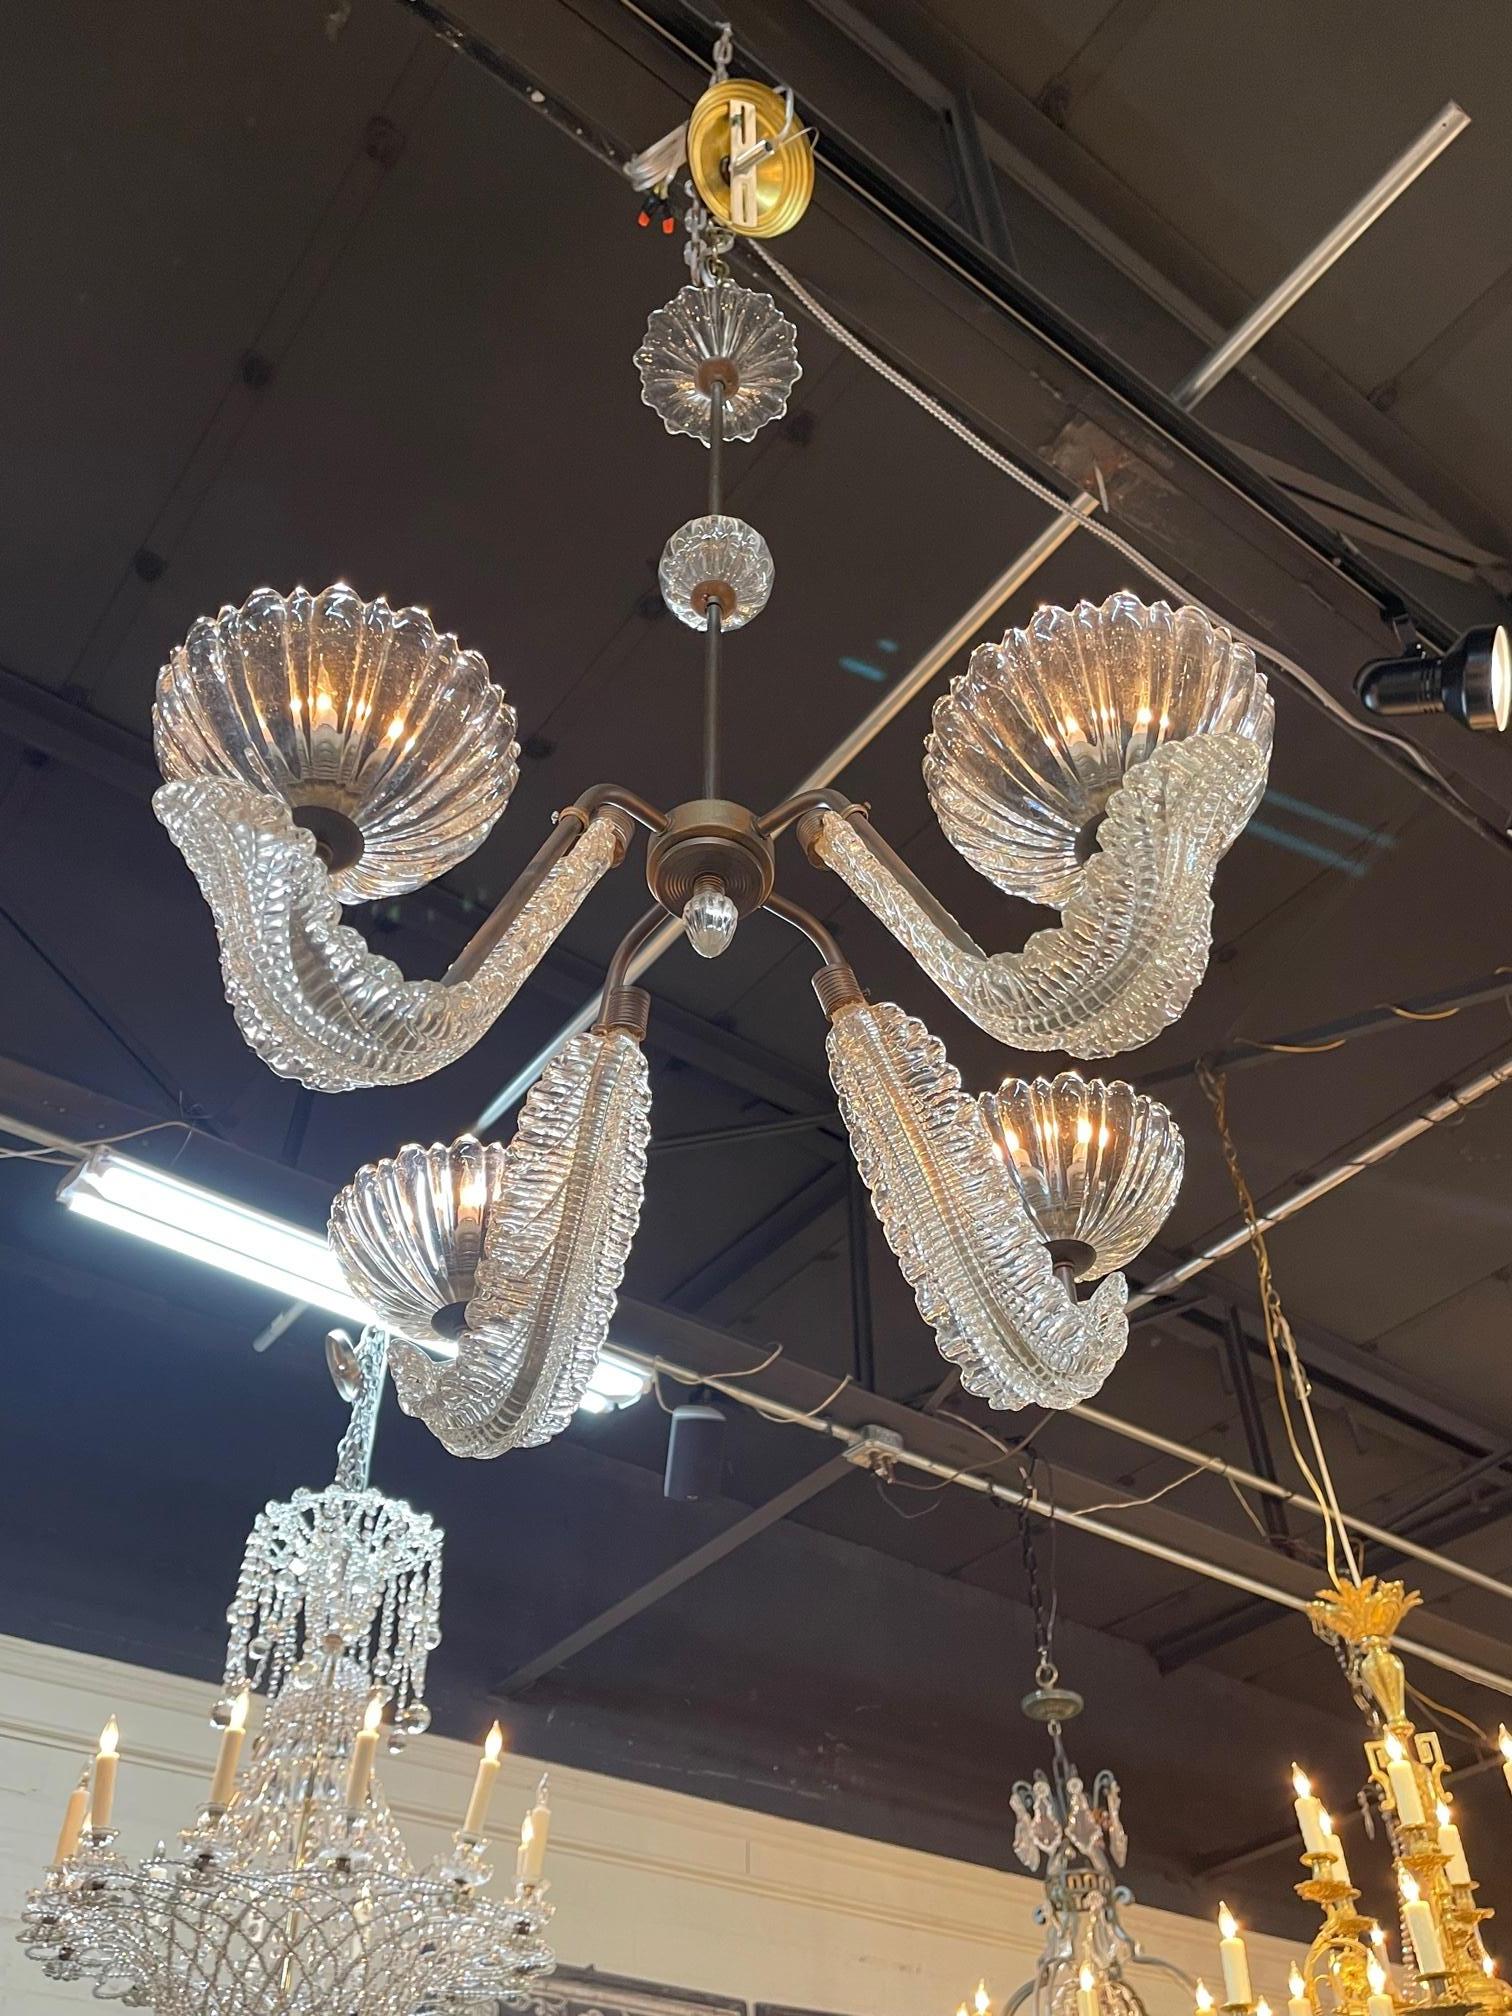 Vintage Italian Murano glass and brass 4 light chandelier after Barrovier, Circa 1960. The chandelier has been professionally re-wired, cleaned and is ready to hang. Includes matching chain and canopy.
  